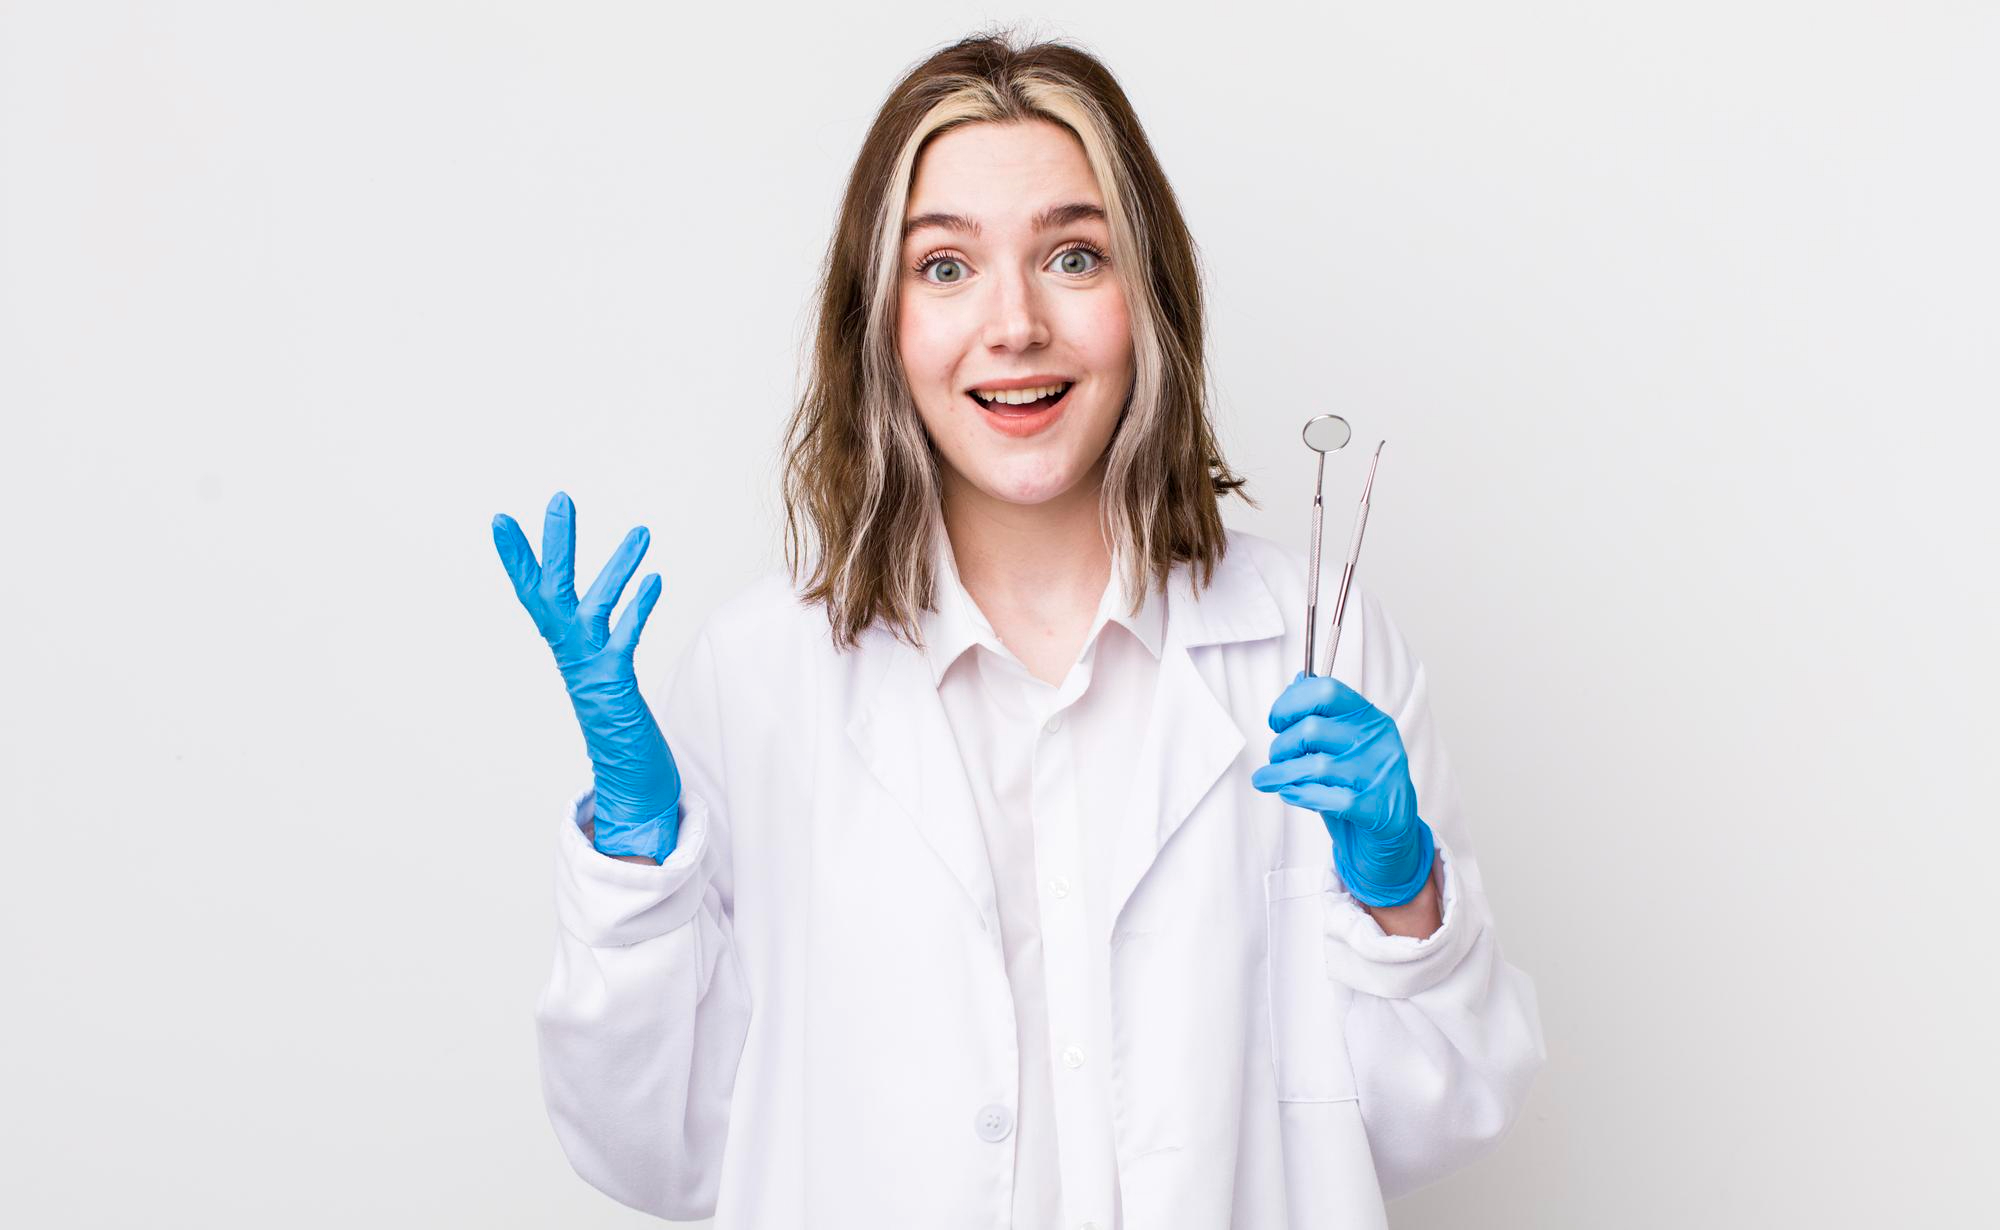 A dentist holding a couple of dental instruments with a surprised as well as inviting expression